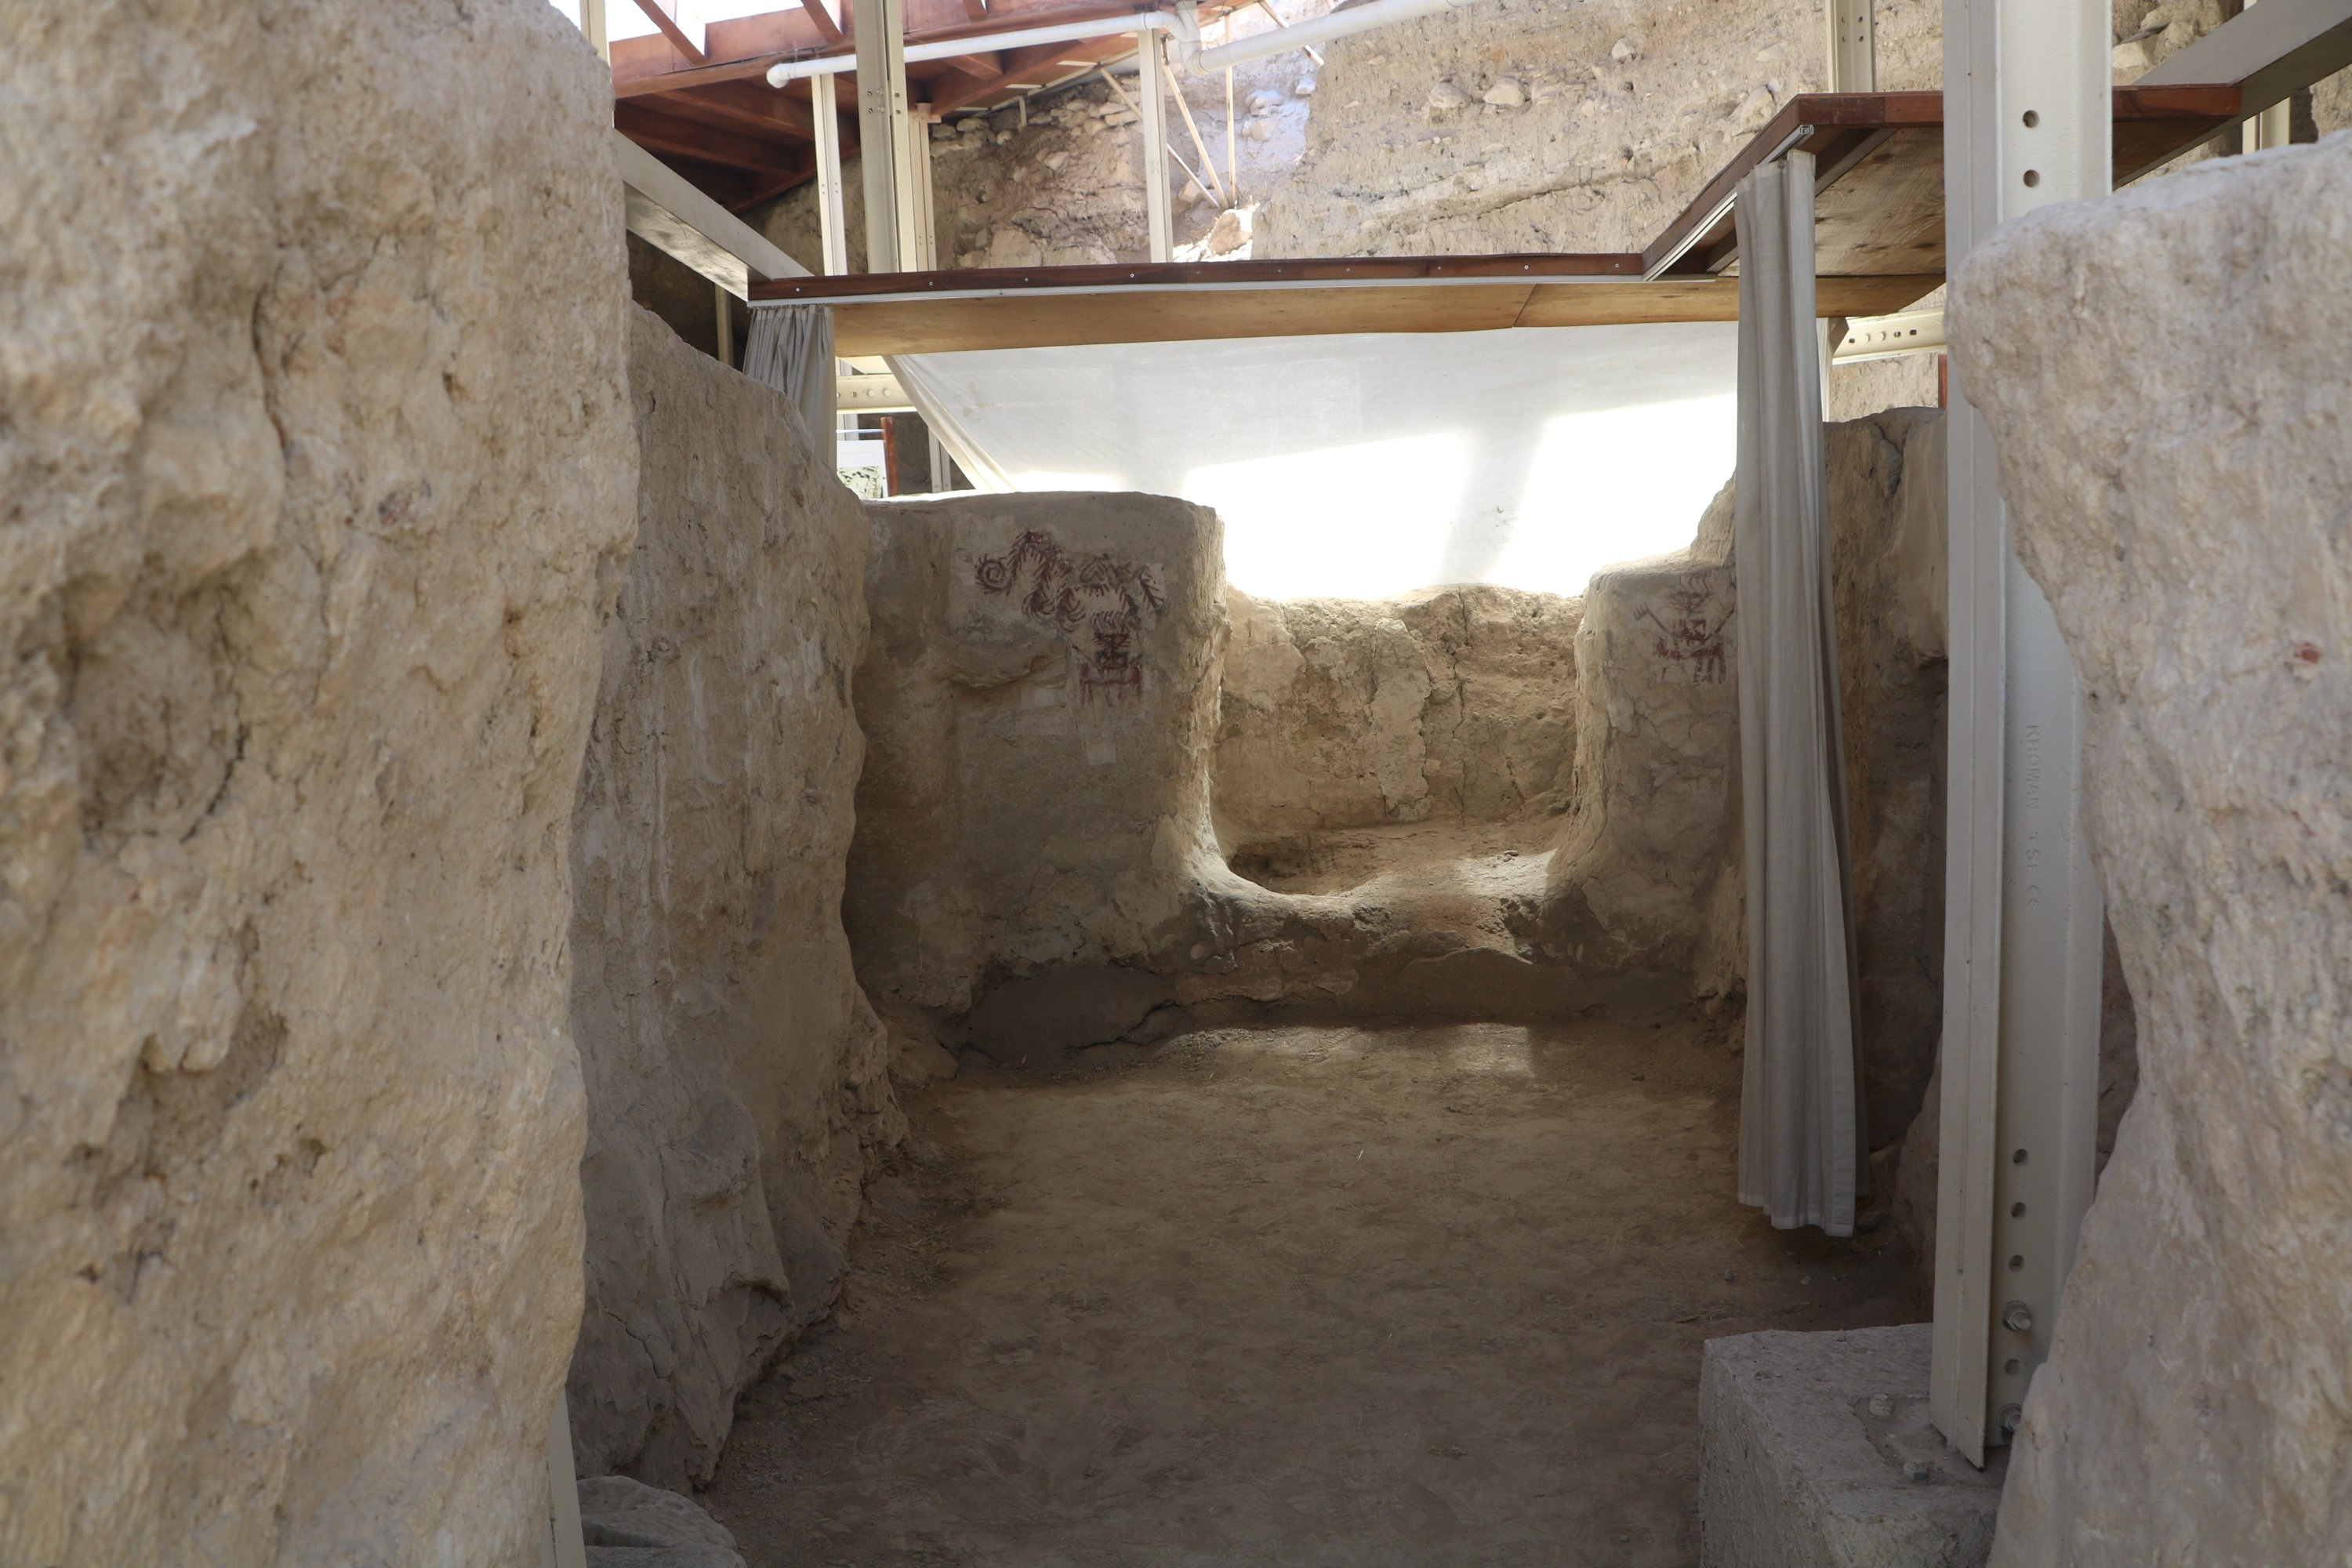 A view from a house found in the archaeological site of Arslantepe, Malatya, eastern Turkey, Aug. 18, 2021. (IHA Photo)